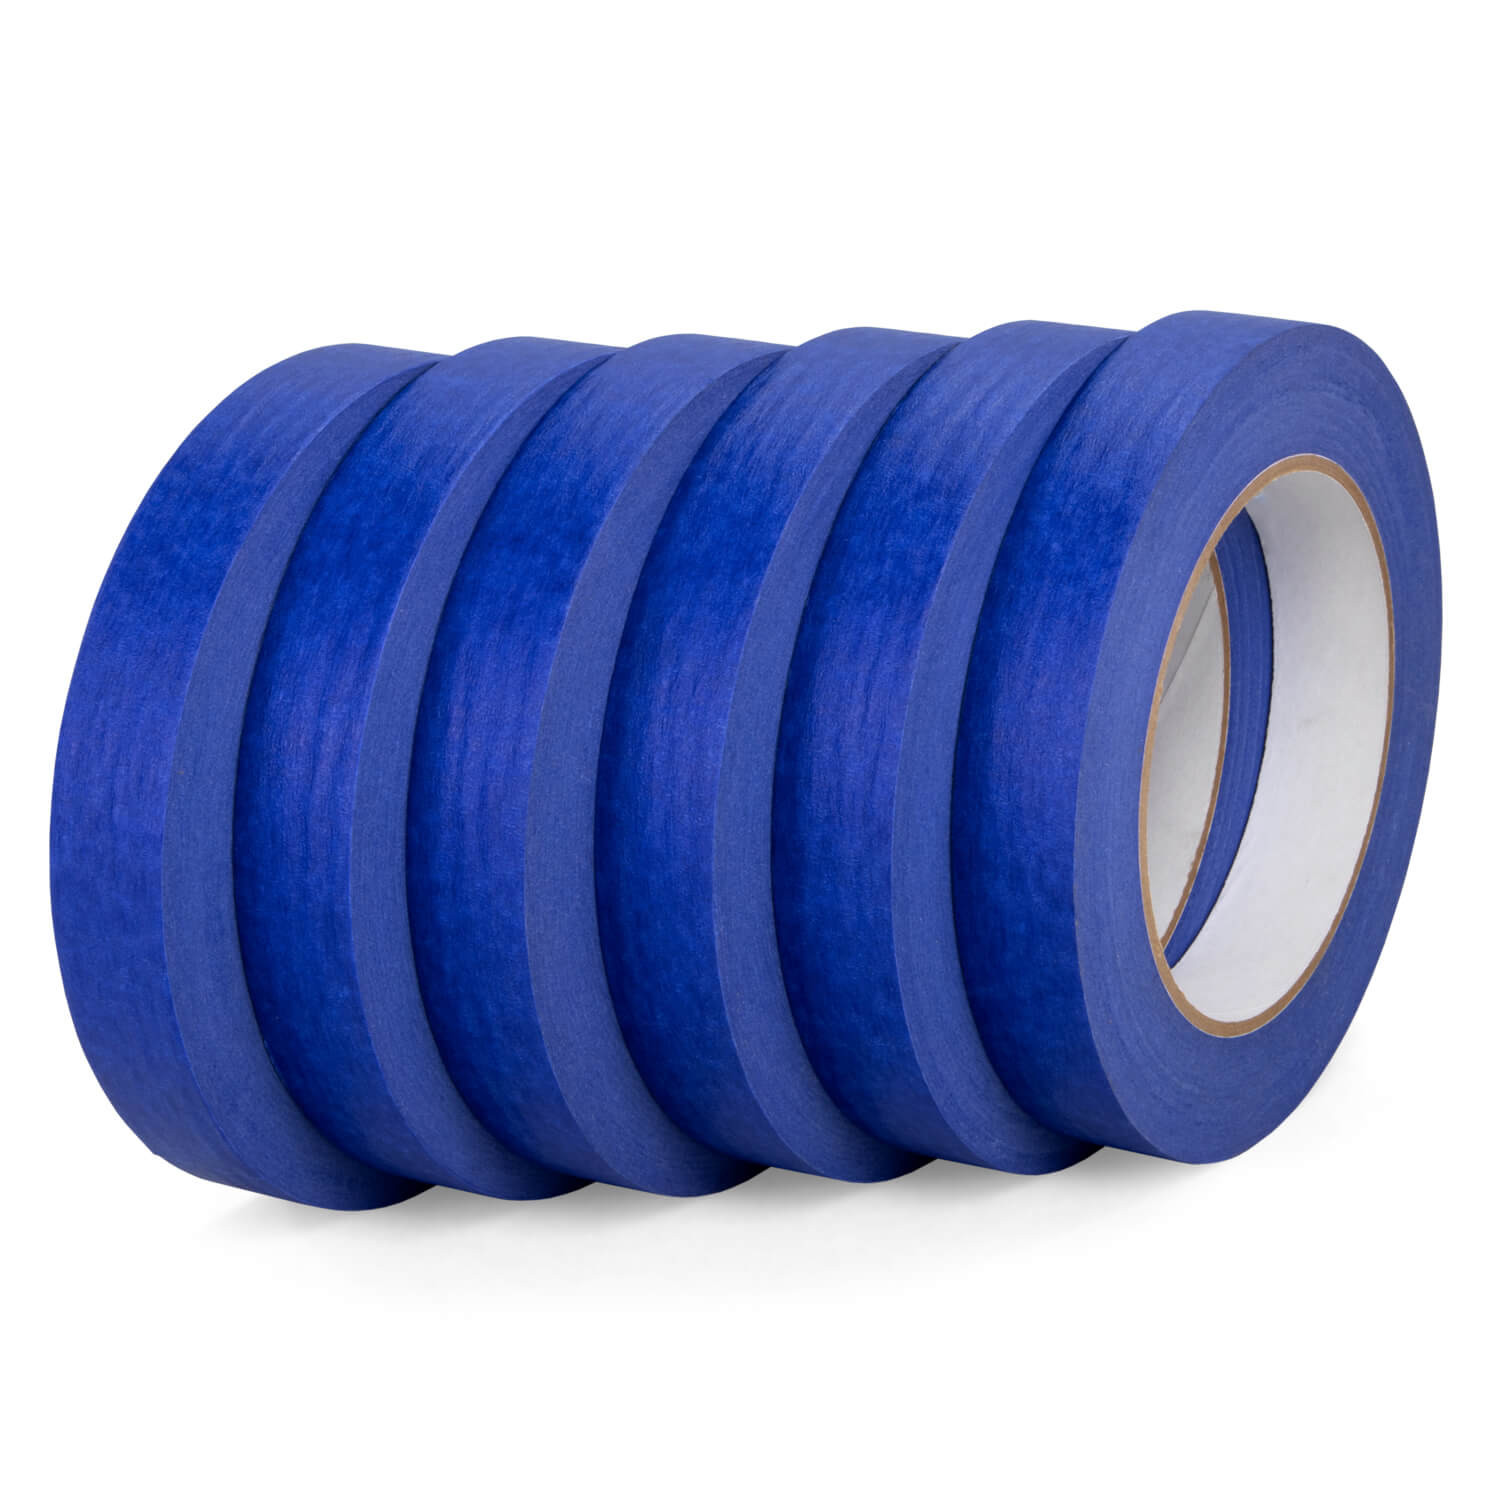 3/4 x 60 yards Blue Painters Tape for Painting, Natural Rubber buy in  stock in U.S. in IDL Packaging